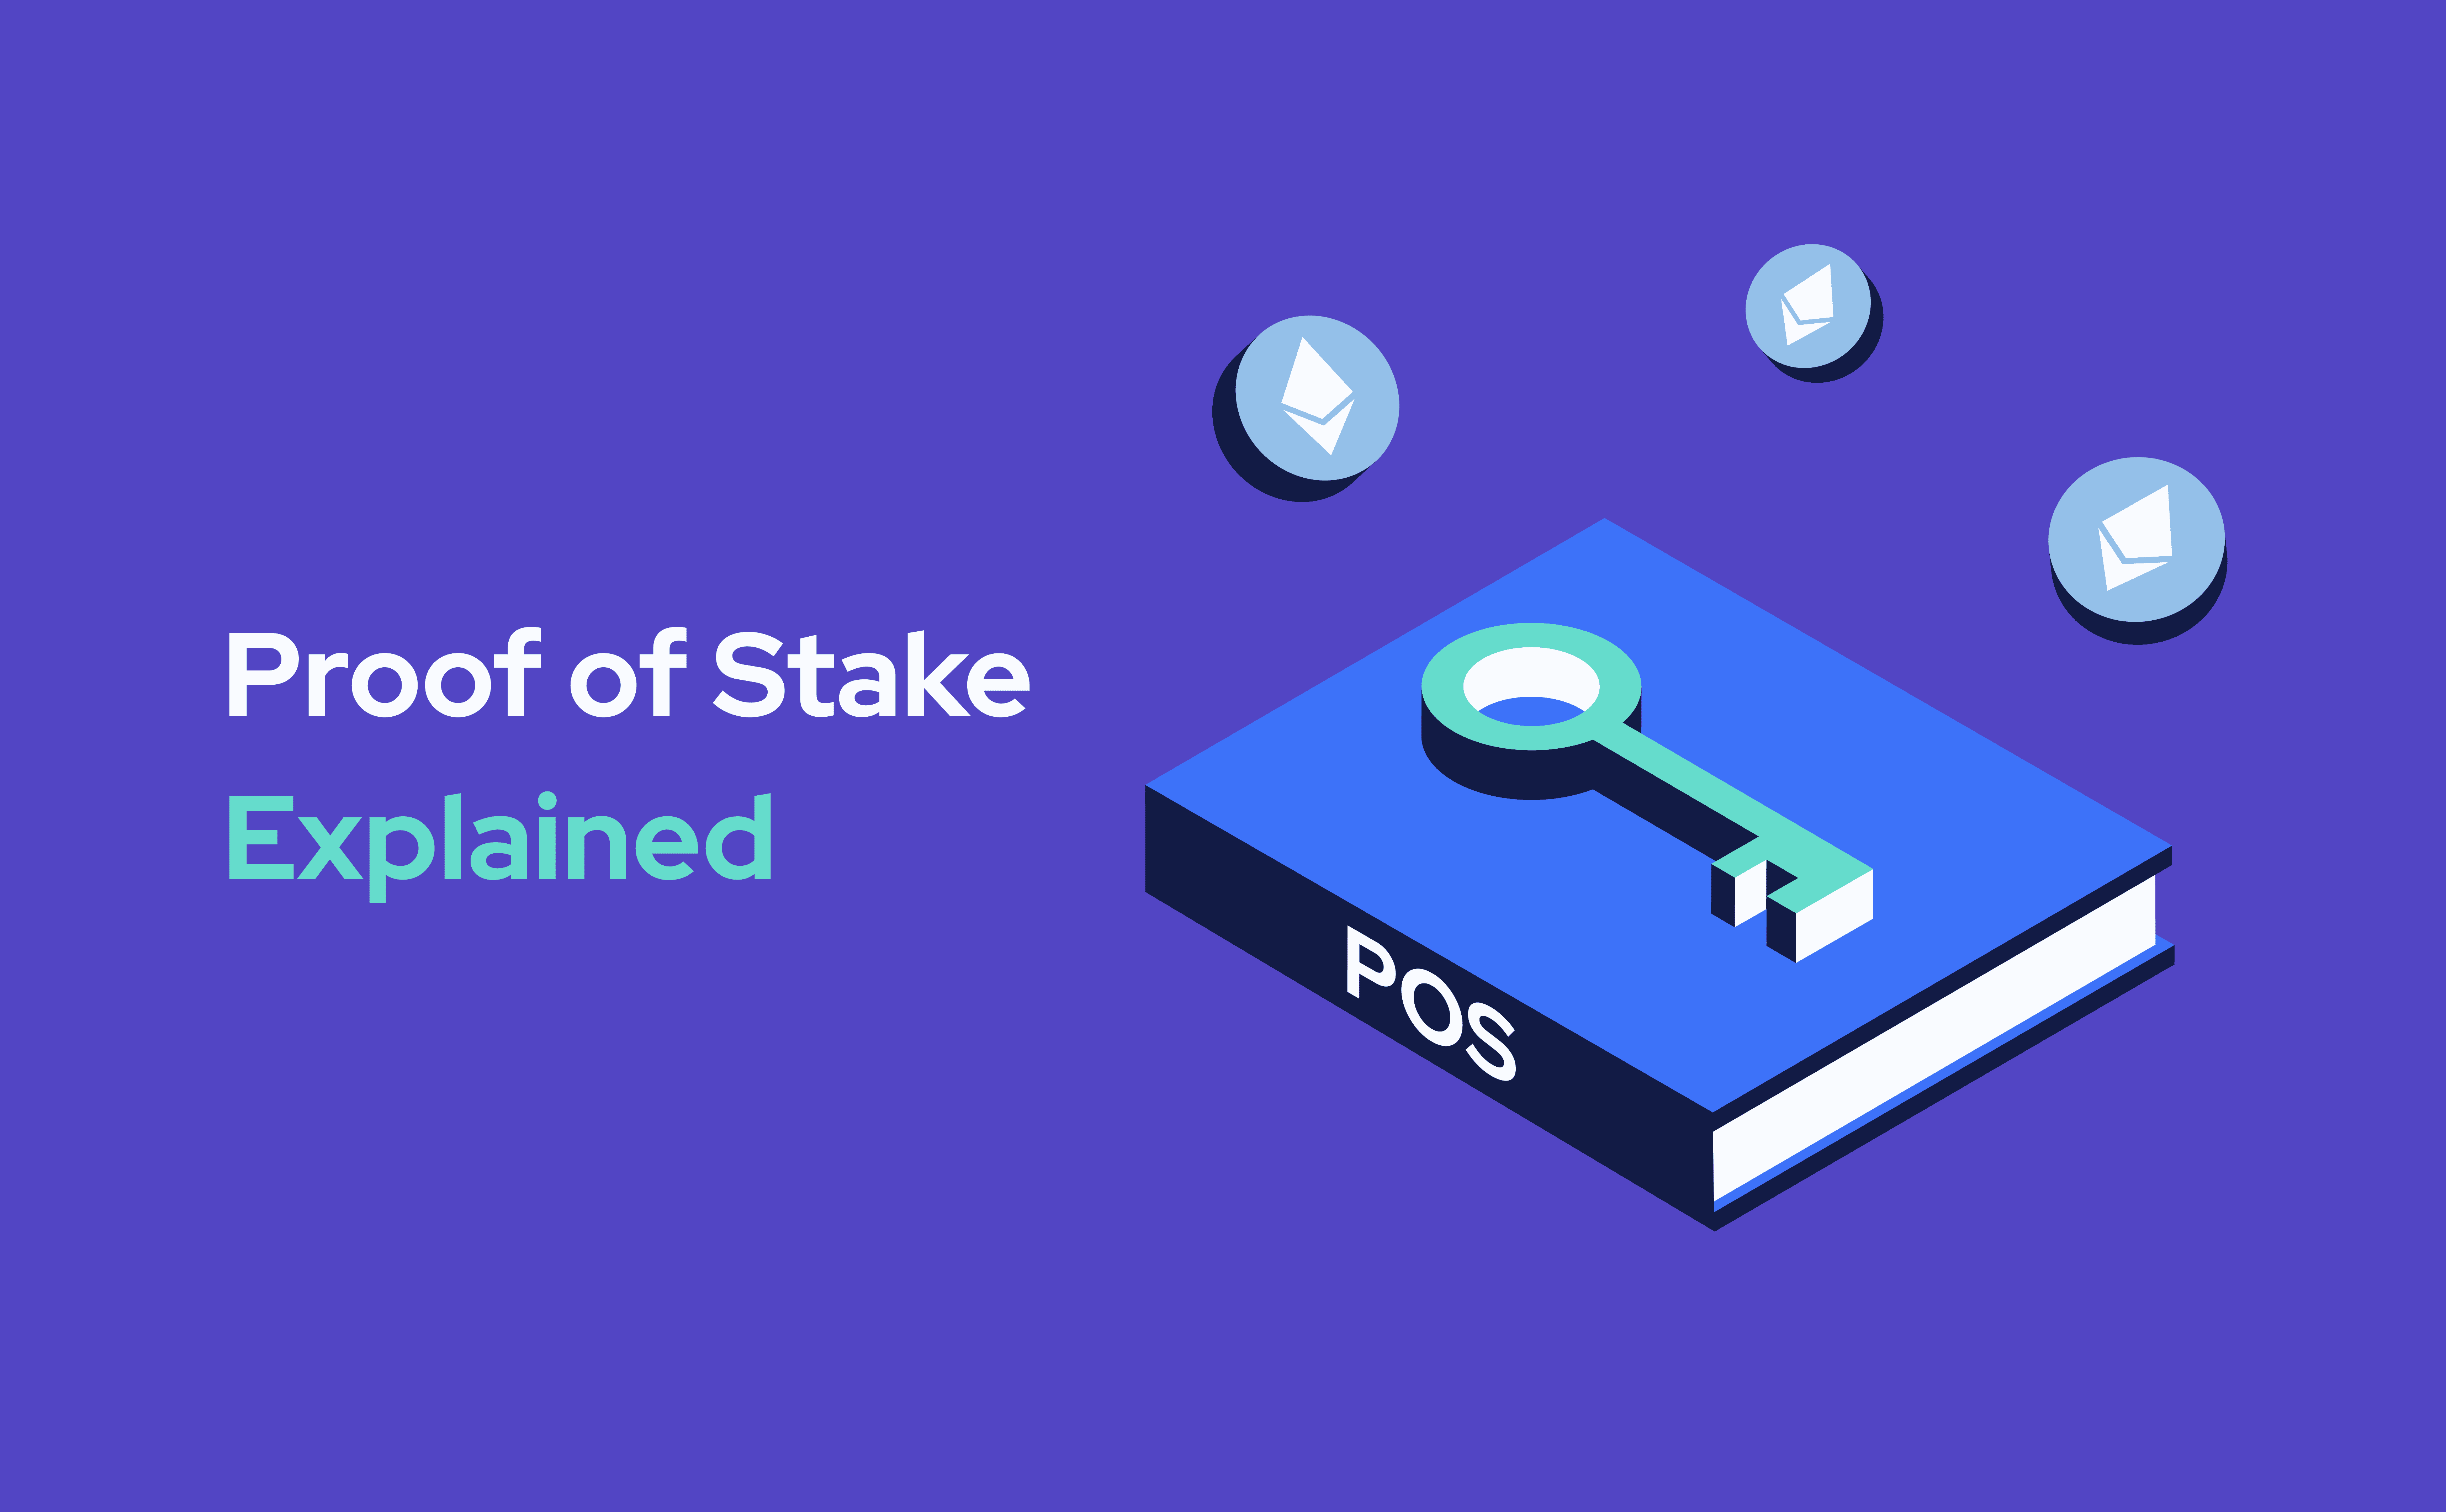 What is Proof of Stake and how does it work